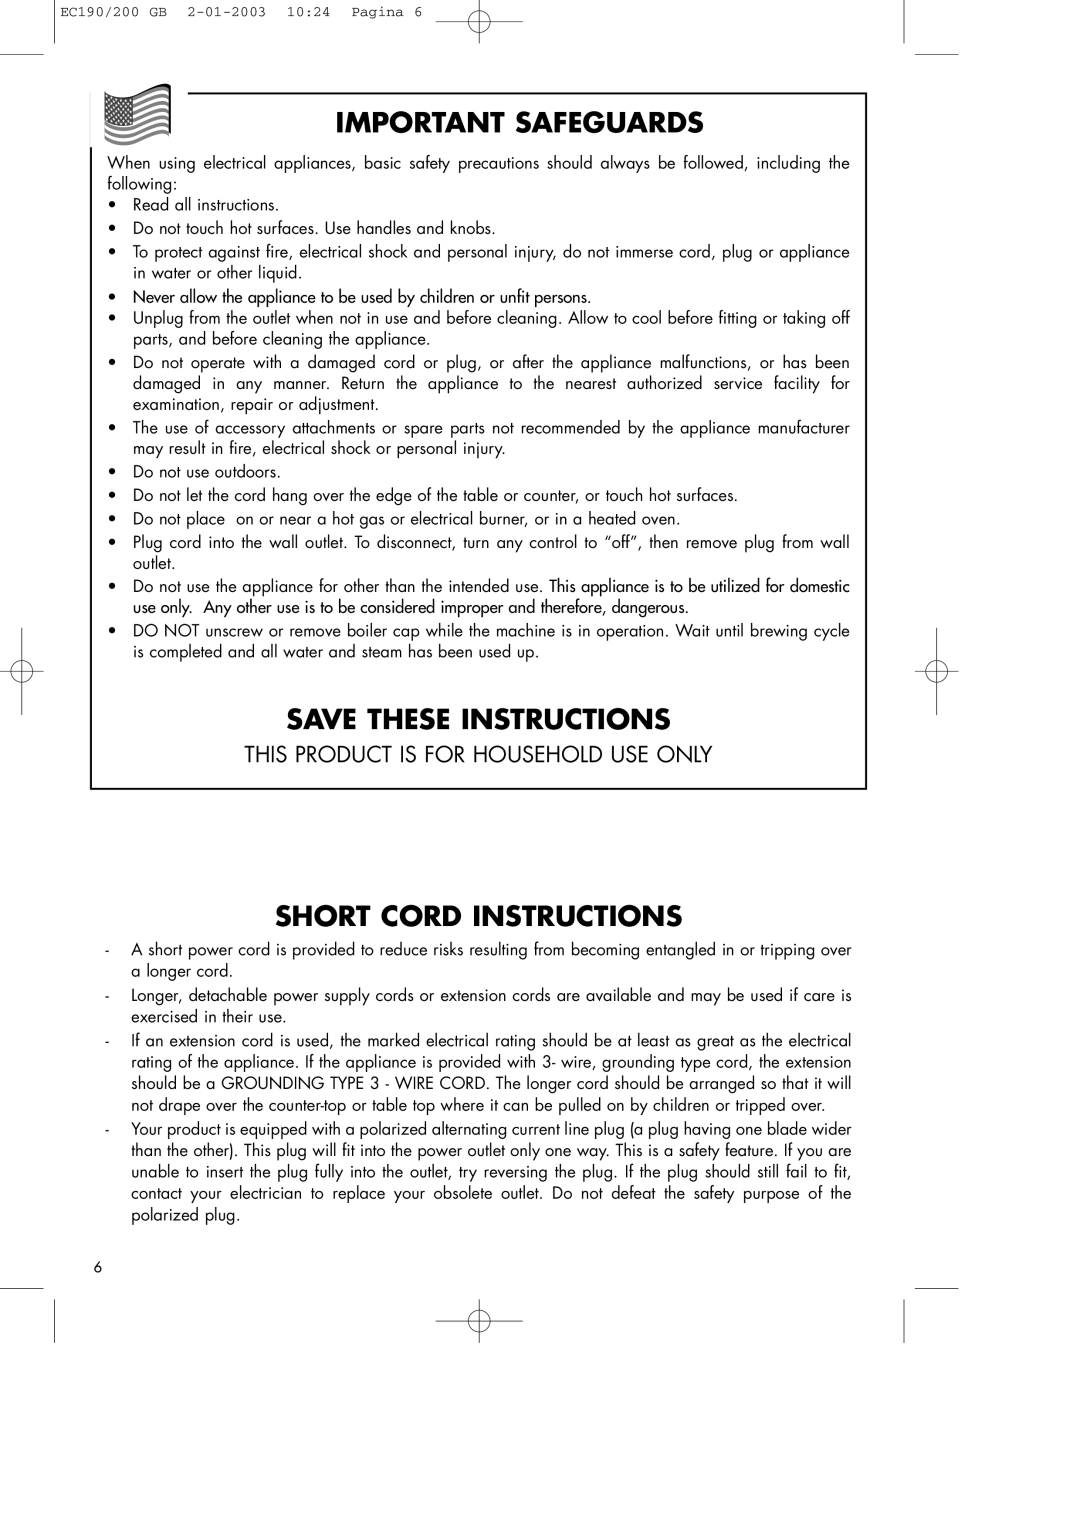 DeLonghi BAR 32 manual Important Safeguards, Save These Instructions, Short Cord Instructions 